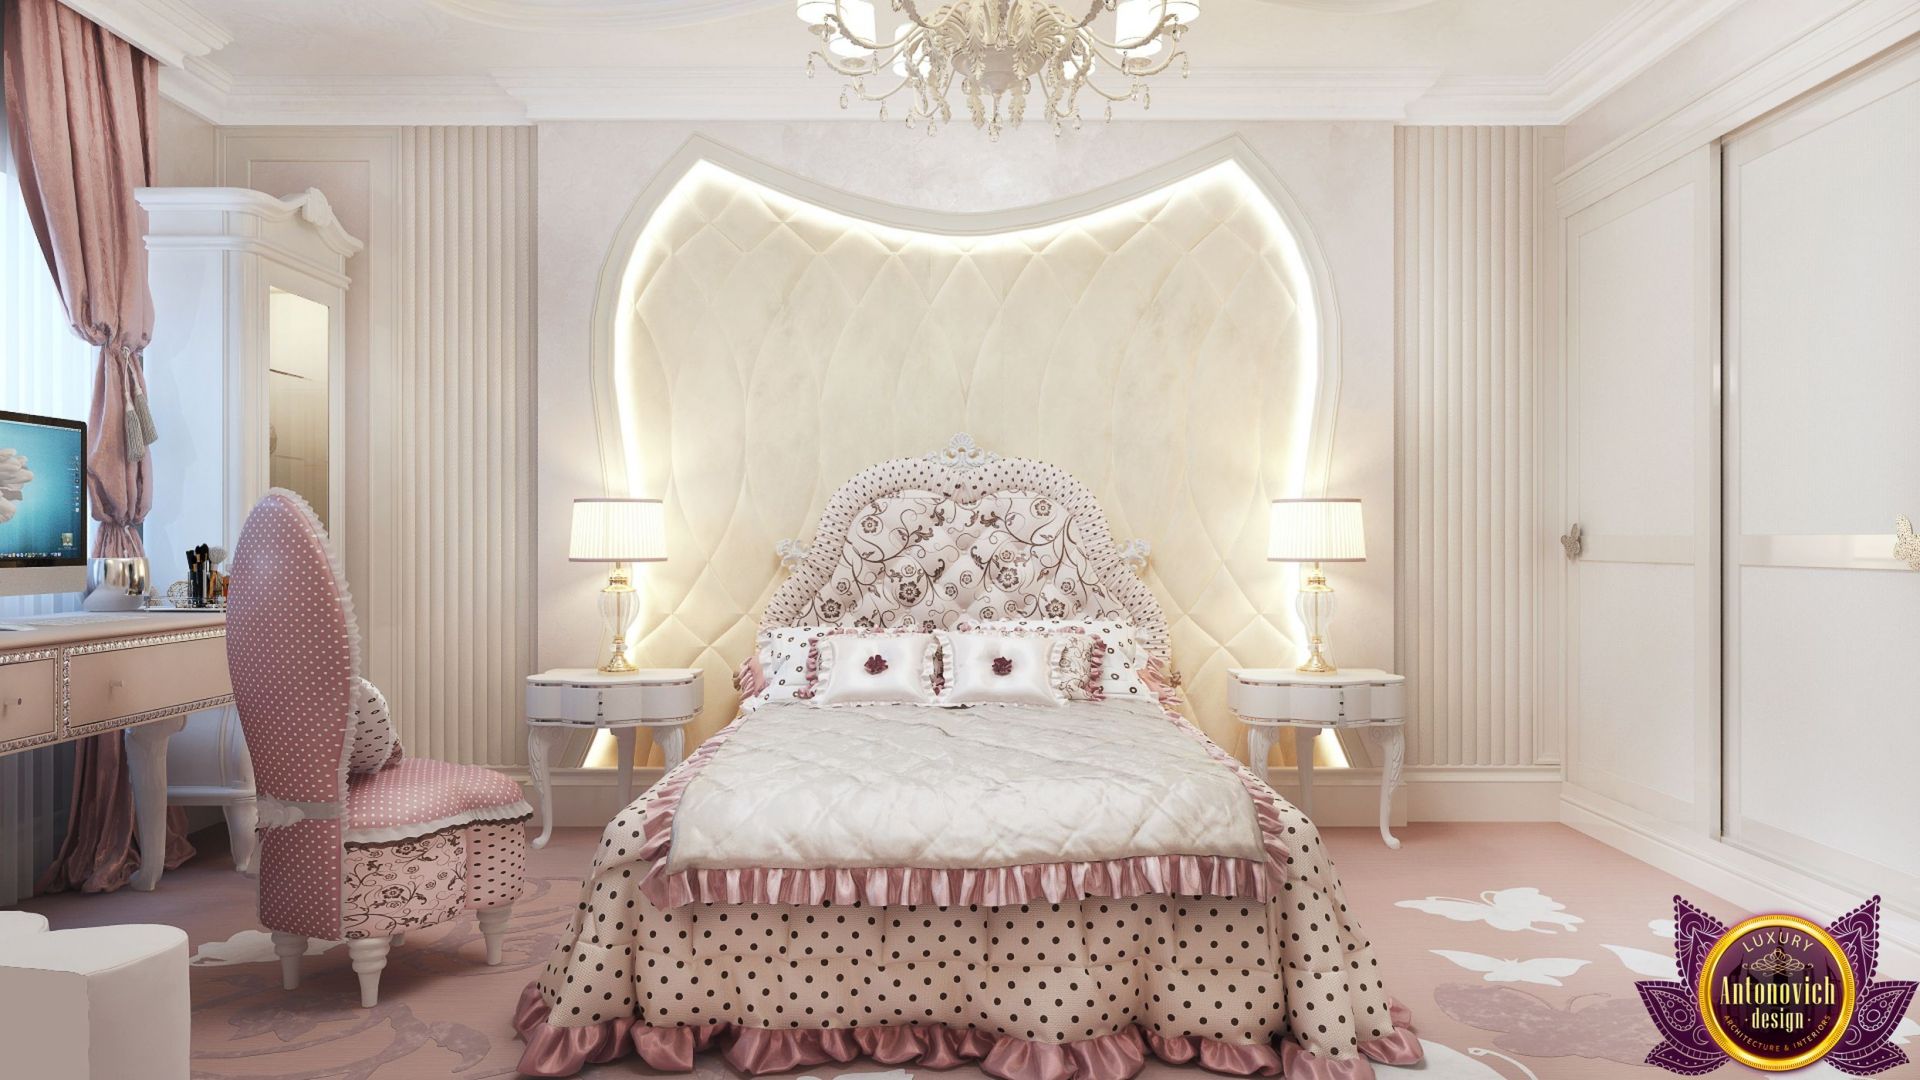 Elegant canopy bed in a luxurious girls bedroom